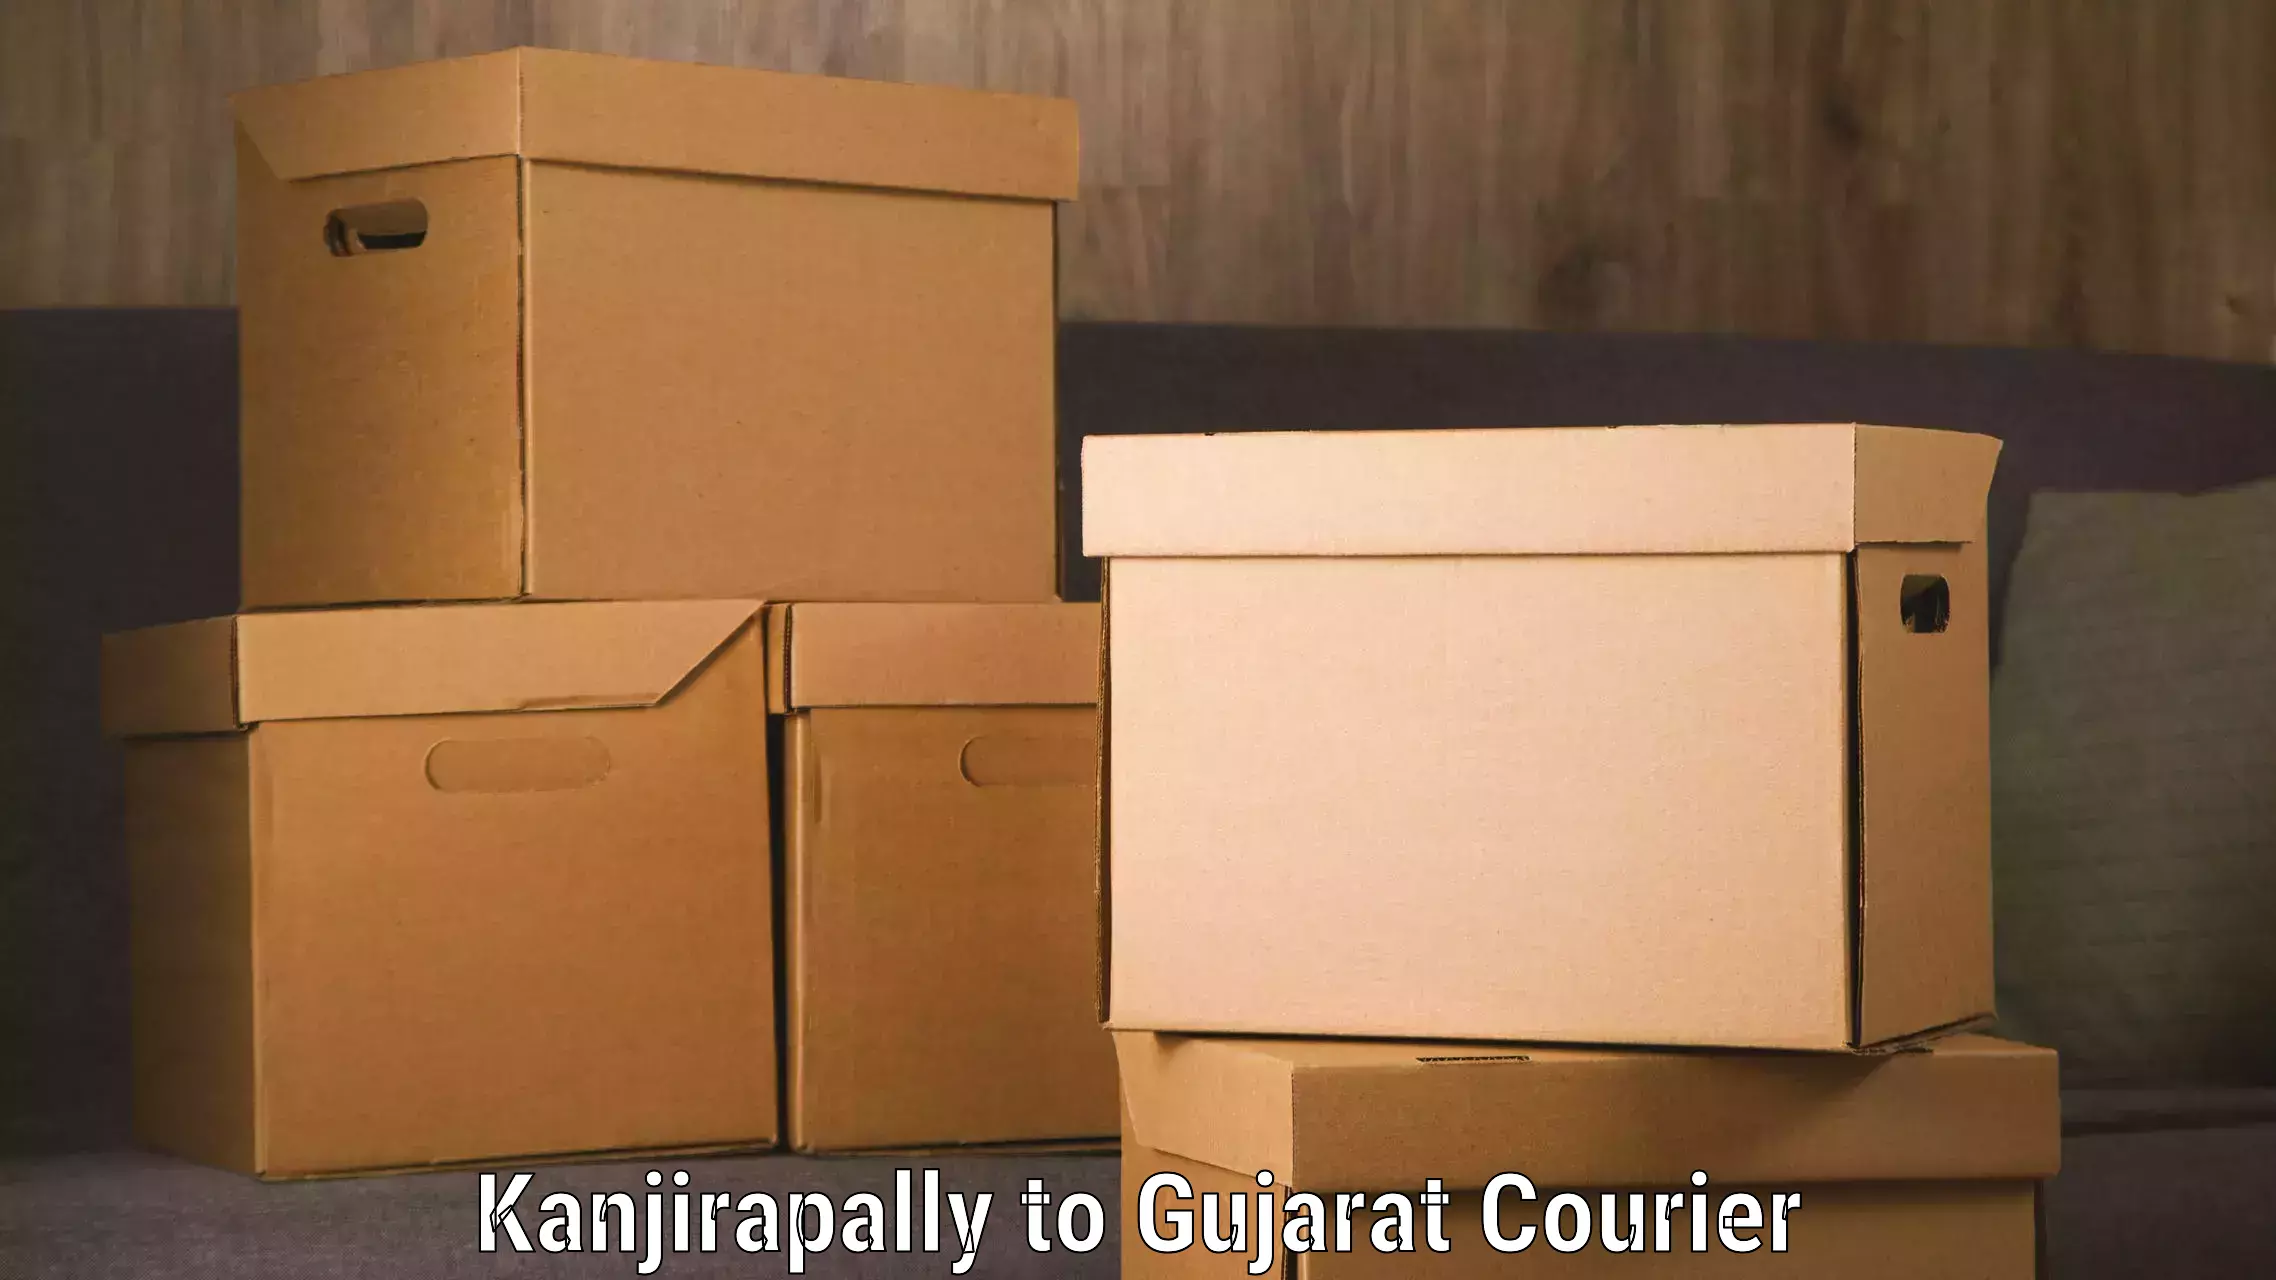 24-hour courier service Kanjirapally to Gujarat